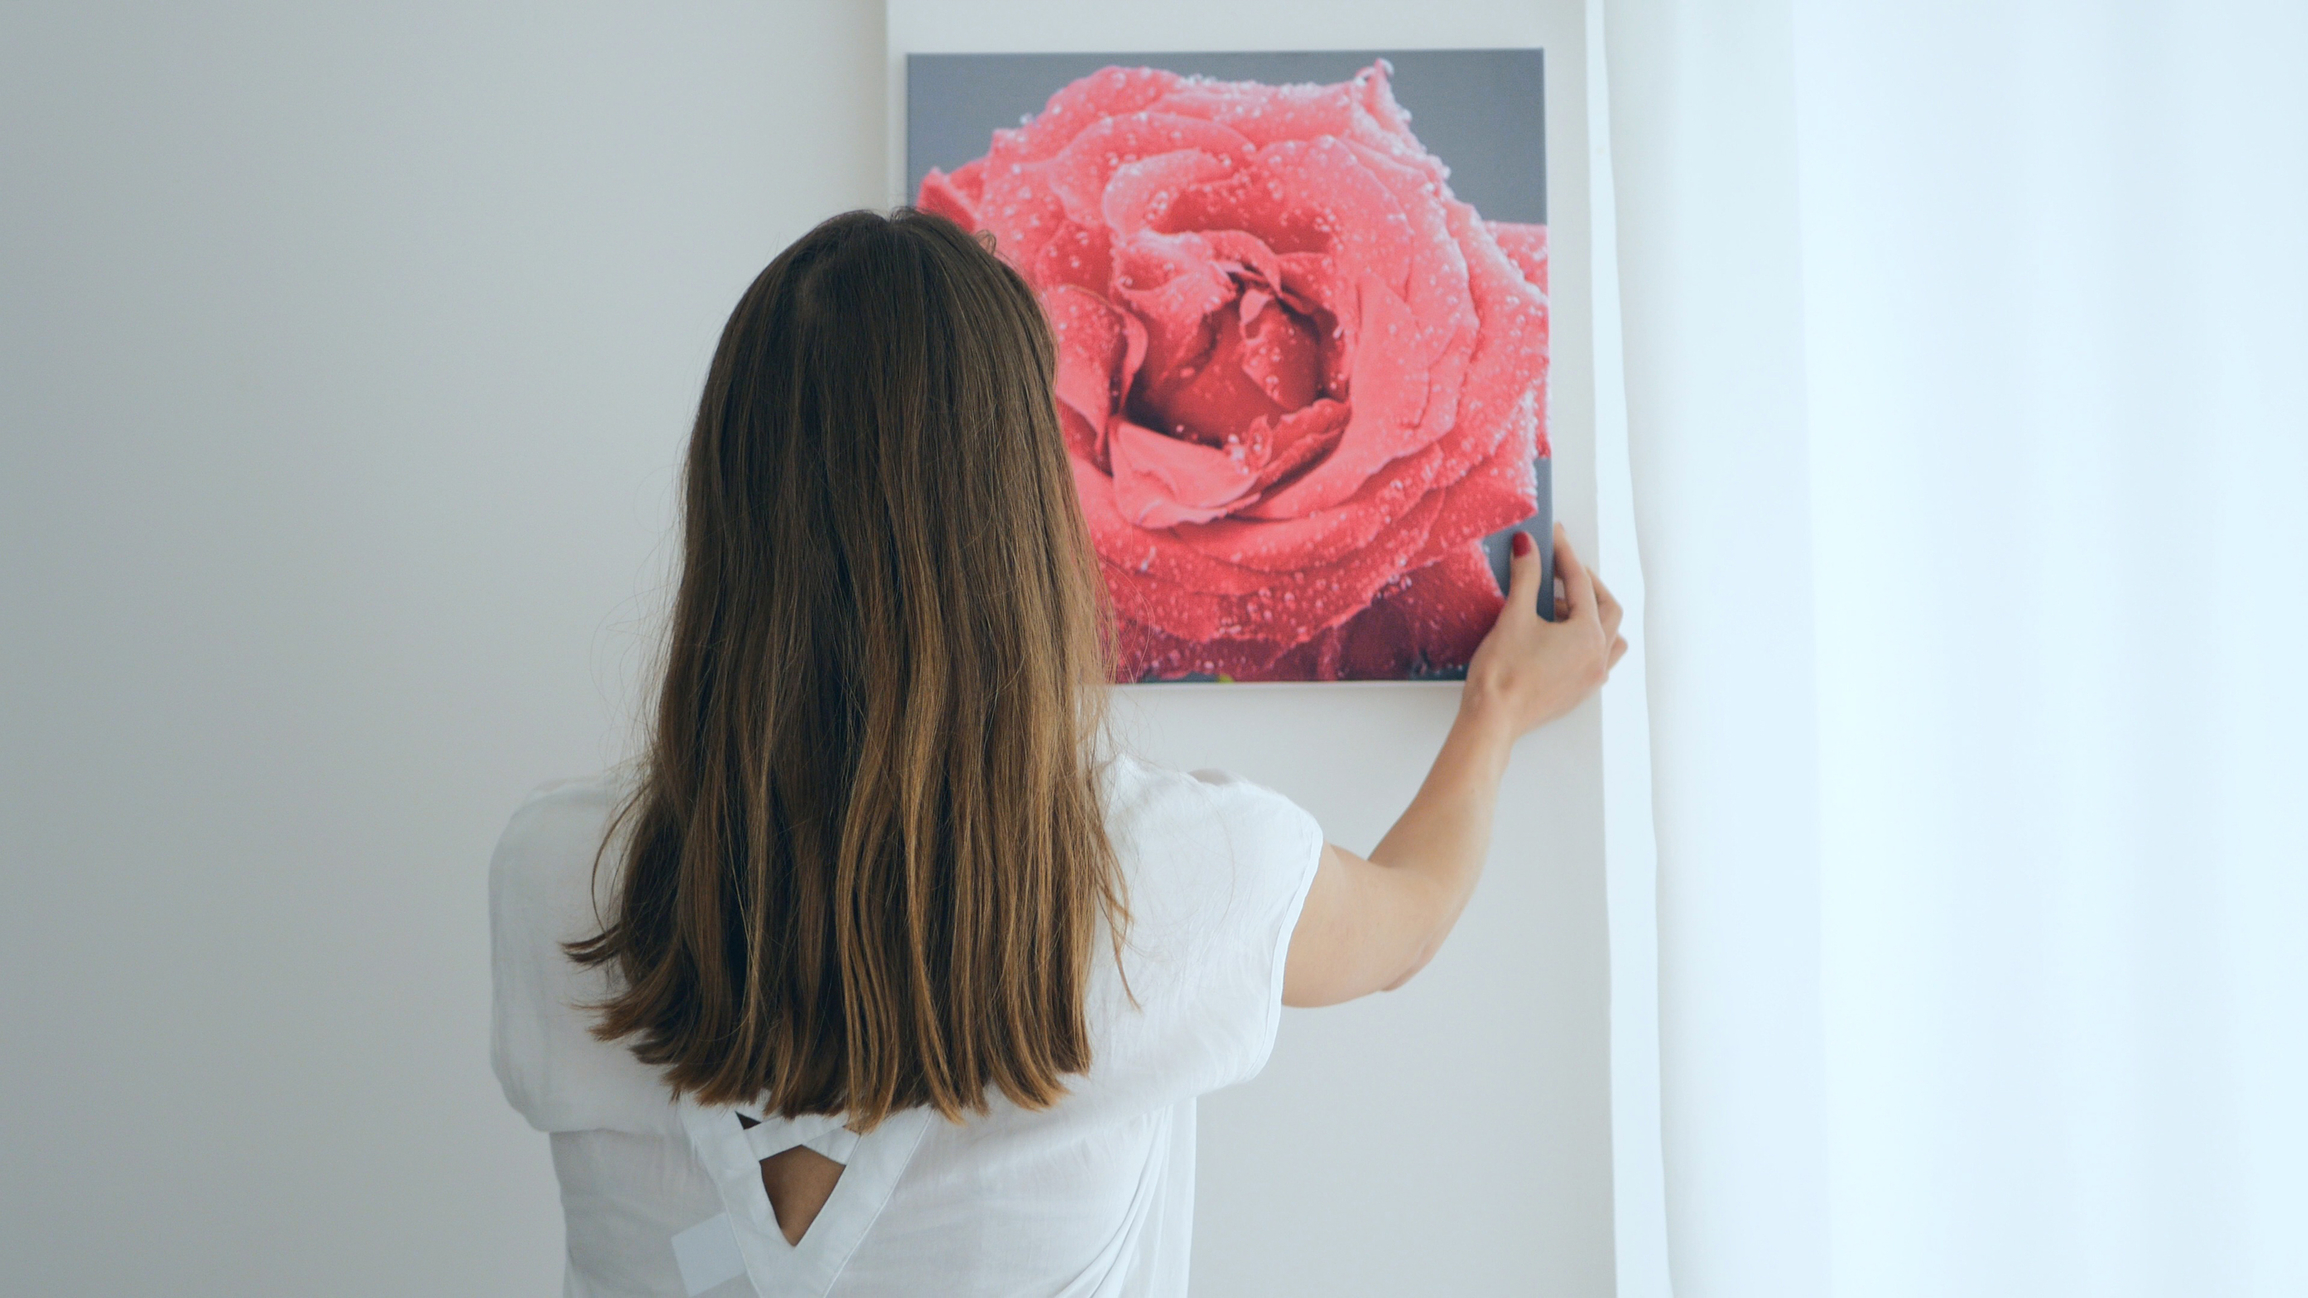 How To Hang Wall Art Without Nails [15 No-Damage Ways]